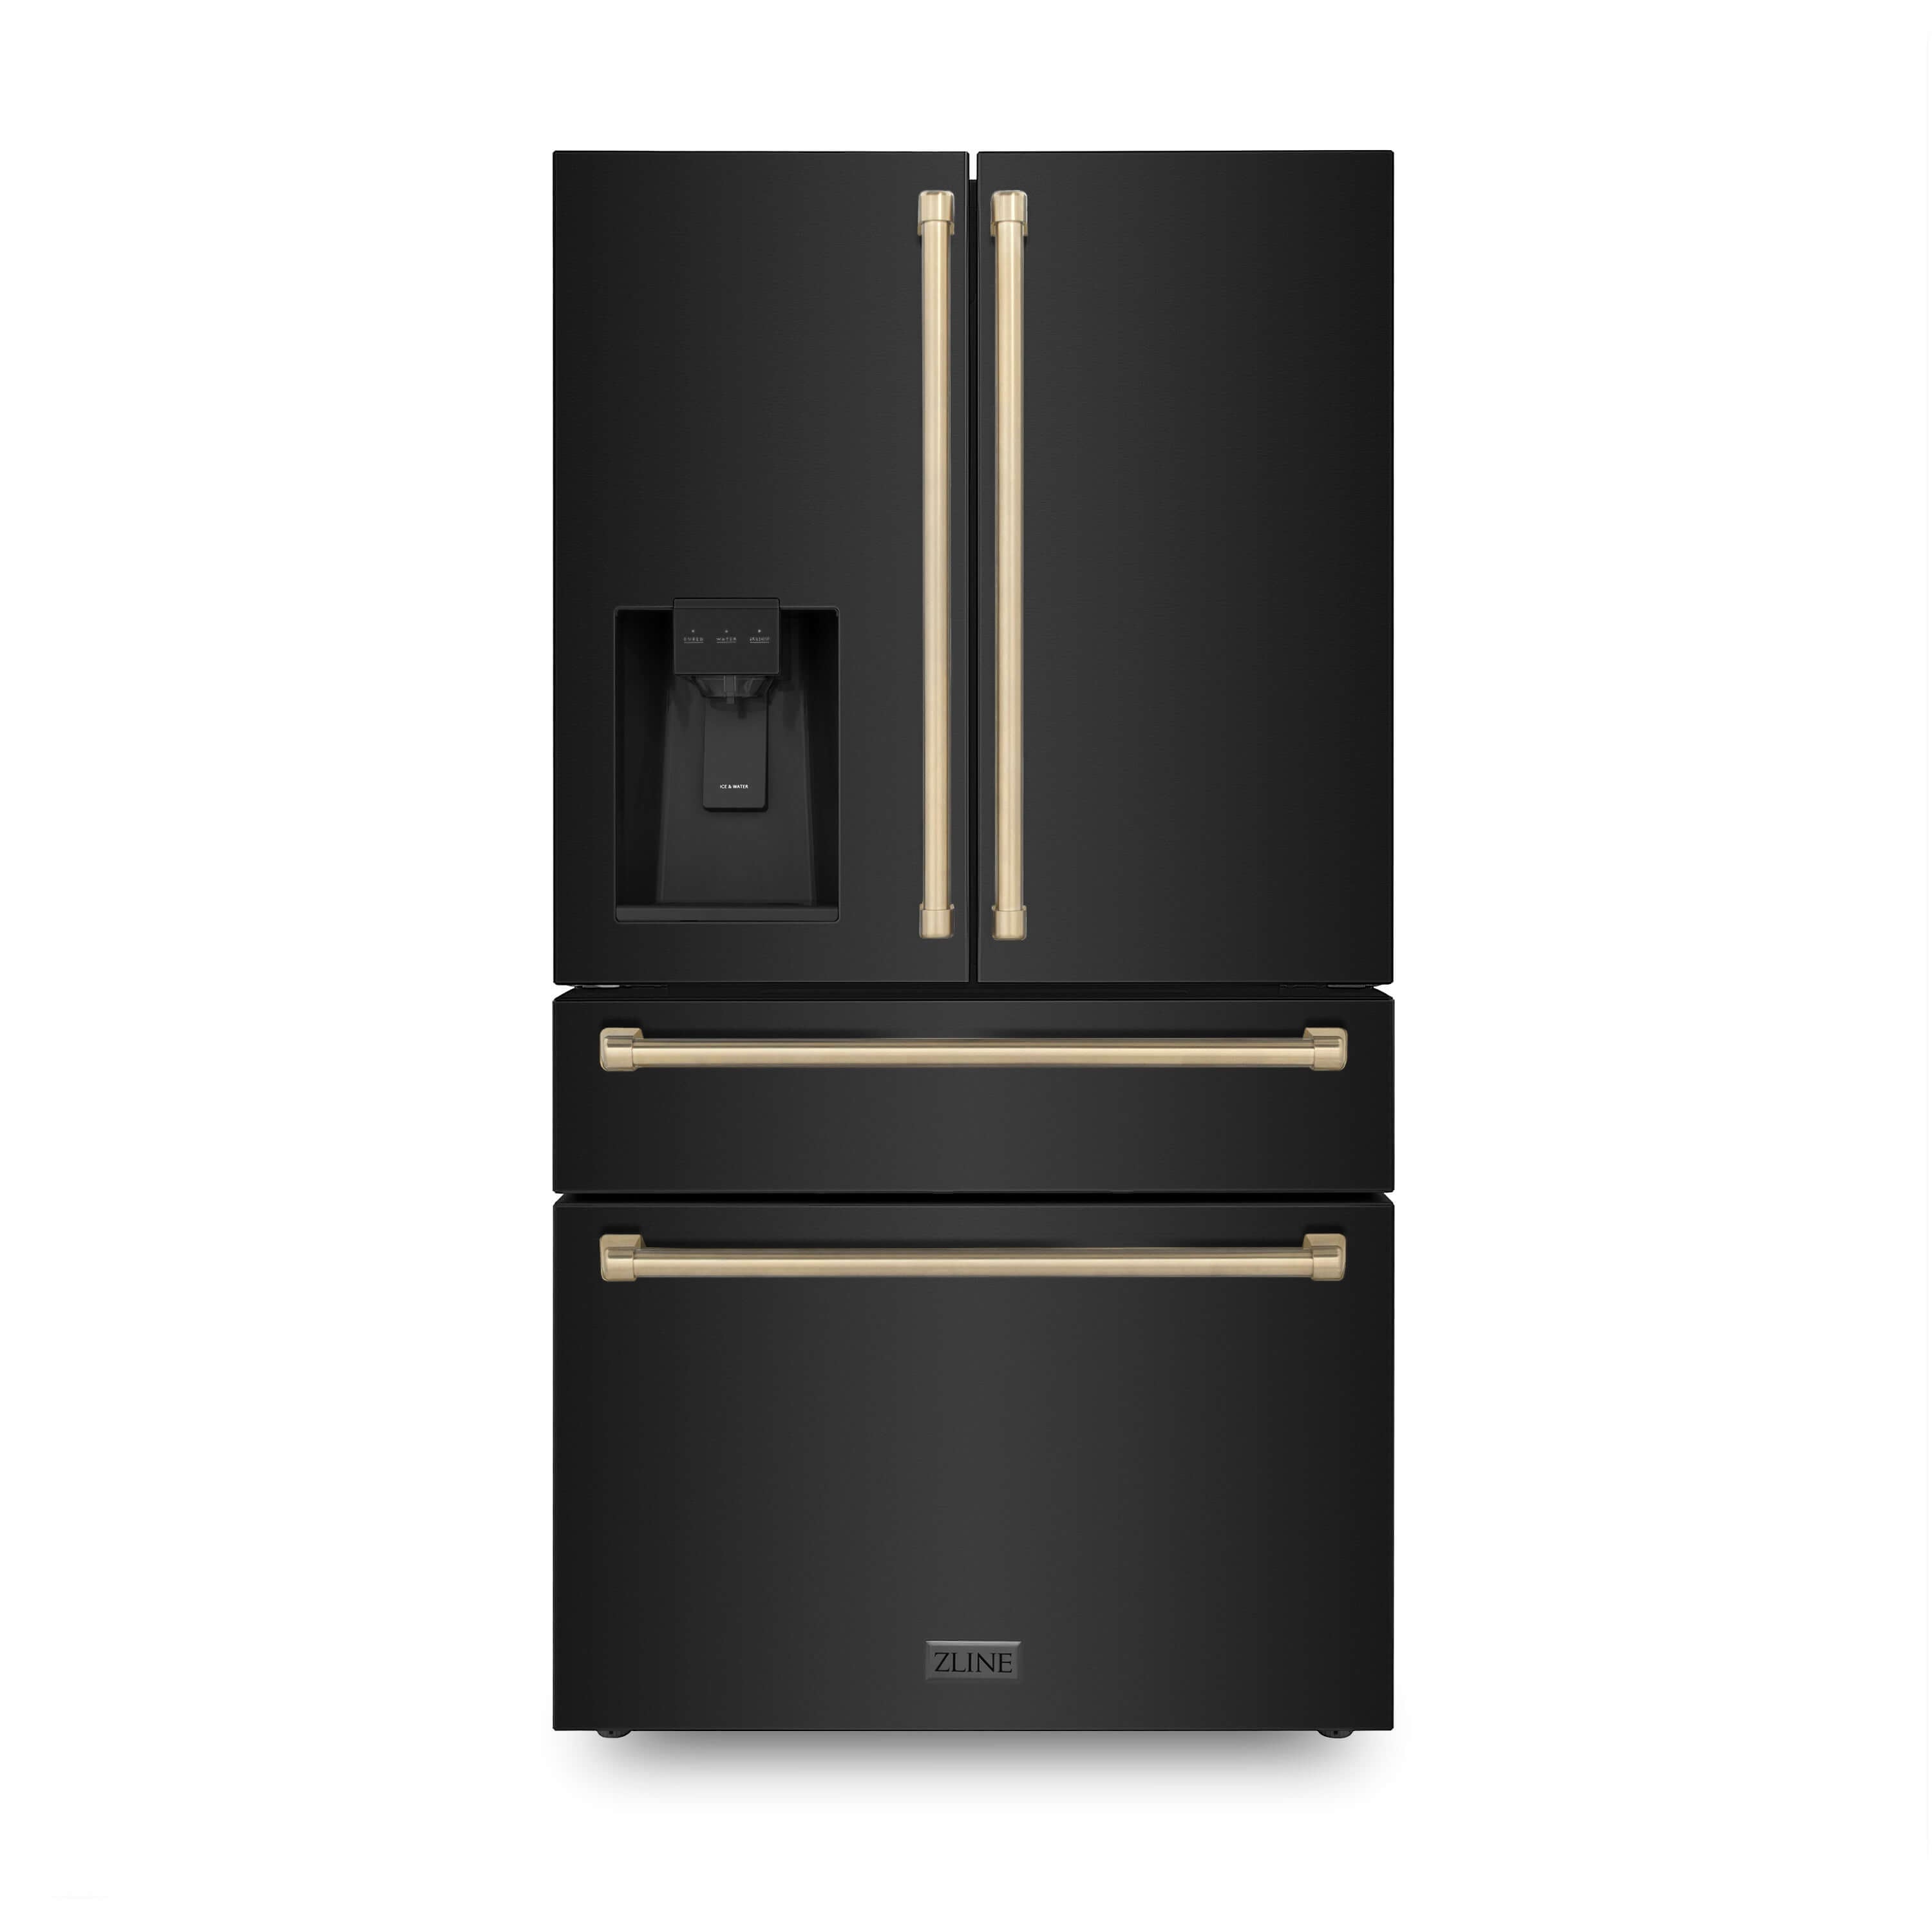 ZLINE Autograph Edition 36 in. 21.6 cu. ft Freestanding French Door Refrigerator with Water and Ice Dispenser in Fingerprint Resistant Black Stainless Steel with Champagne Bronze Accents (RFMZ-W-36-BS-CB) front, closed.